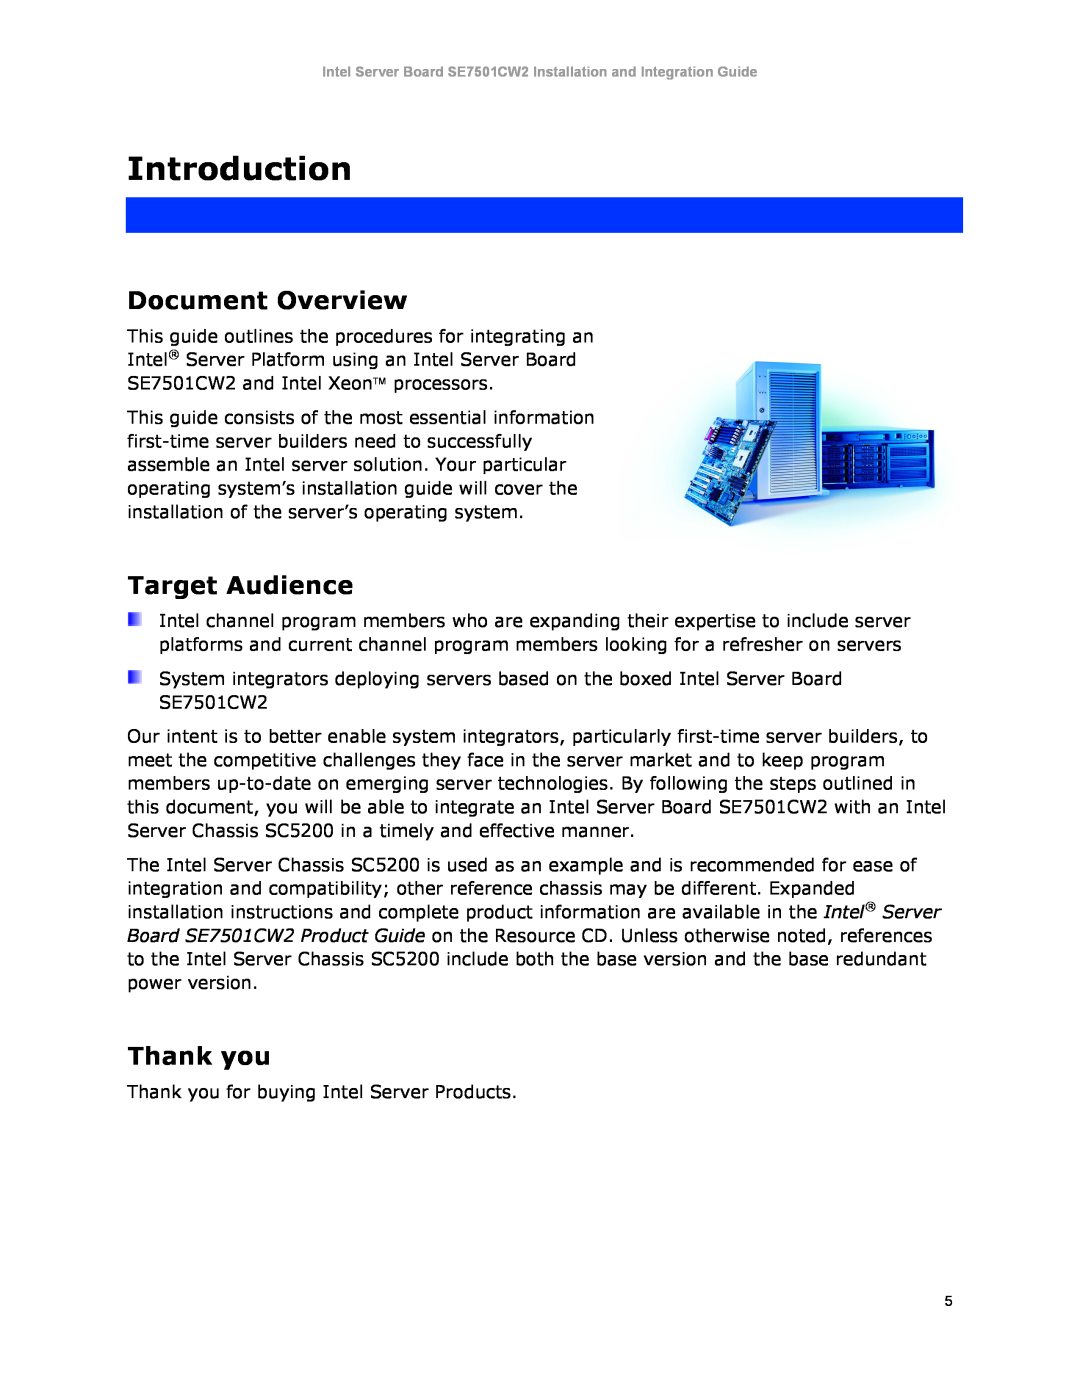 Intel SE7501CW2 manual Introduction, Document Overview, Target Audience, Thank you 